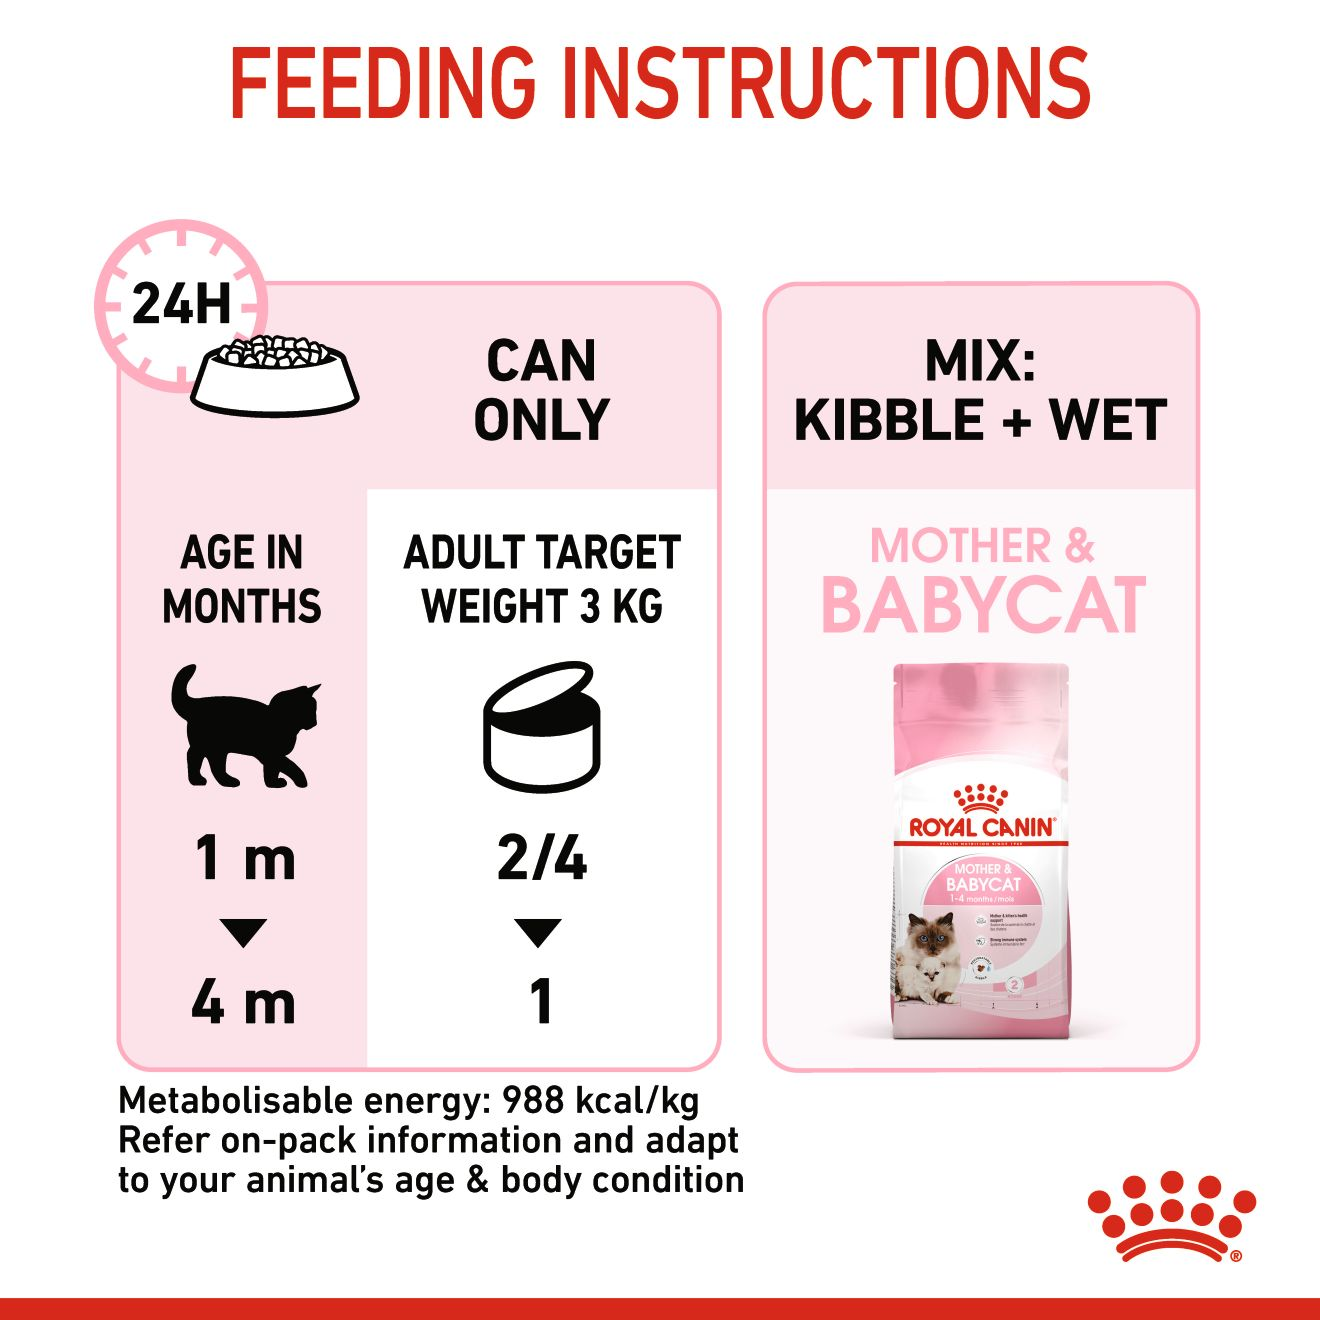 ROYAL CANIN Mother & Babycat 12 x 195G